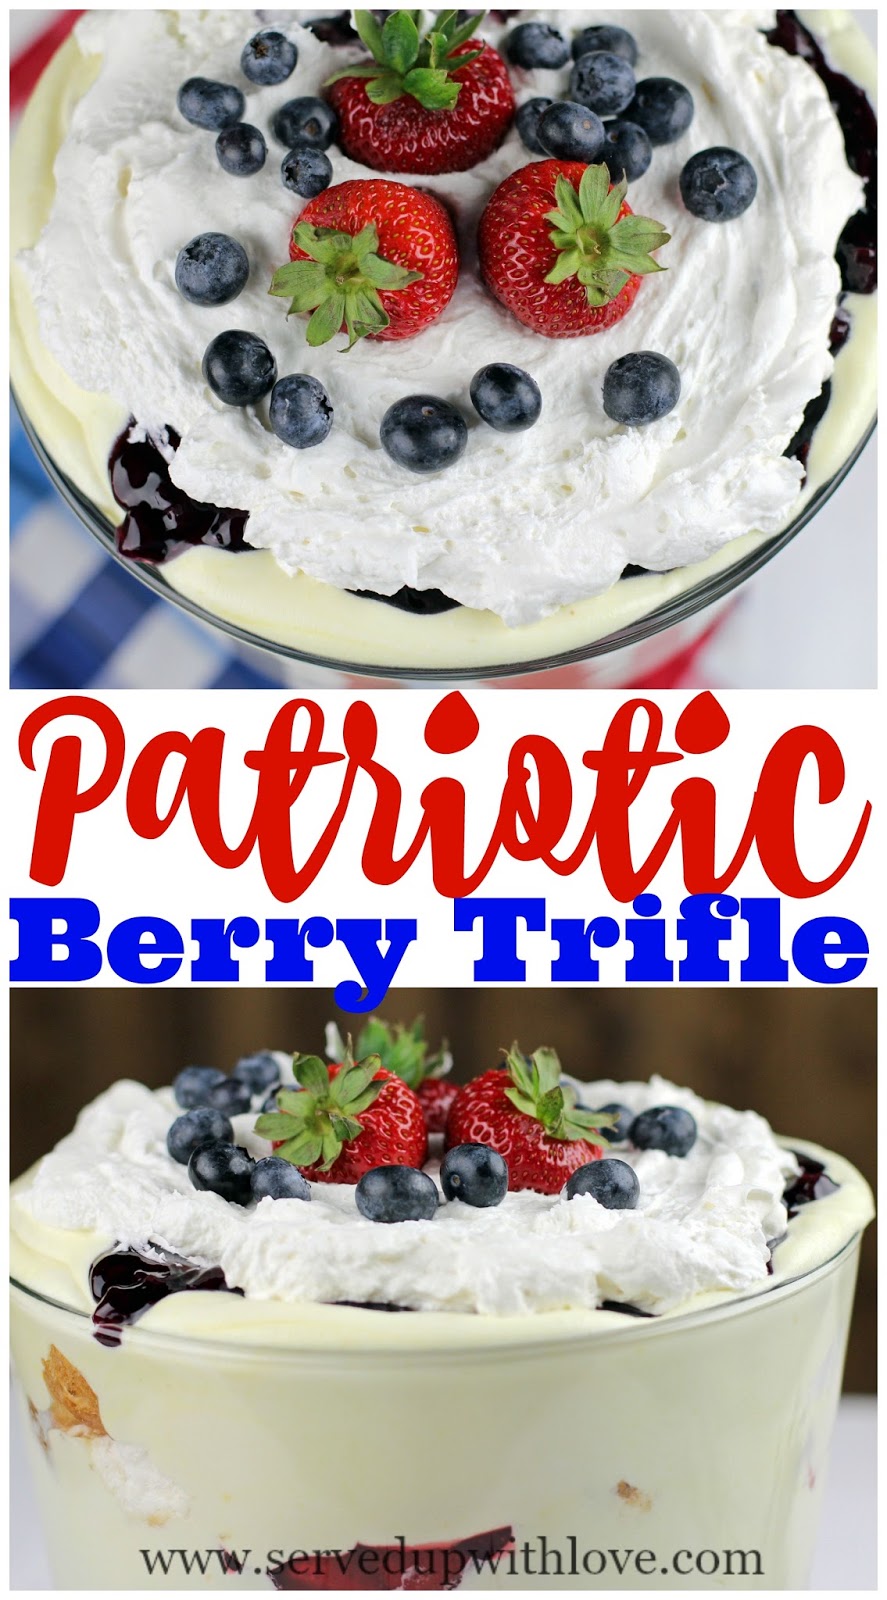 Served Up With Love: Patriotic Berry Trifle